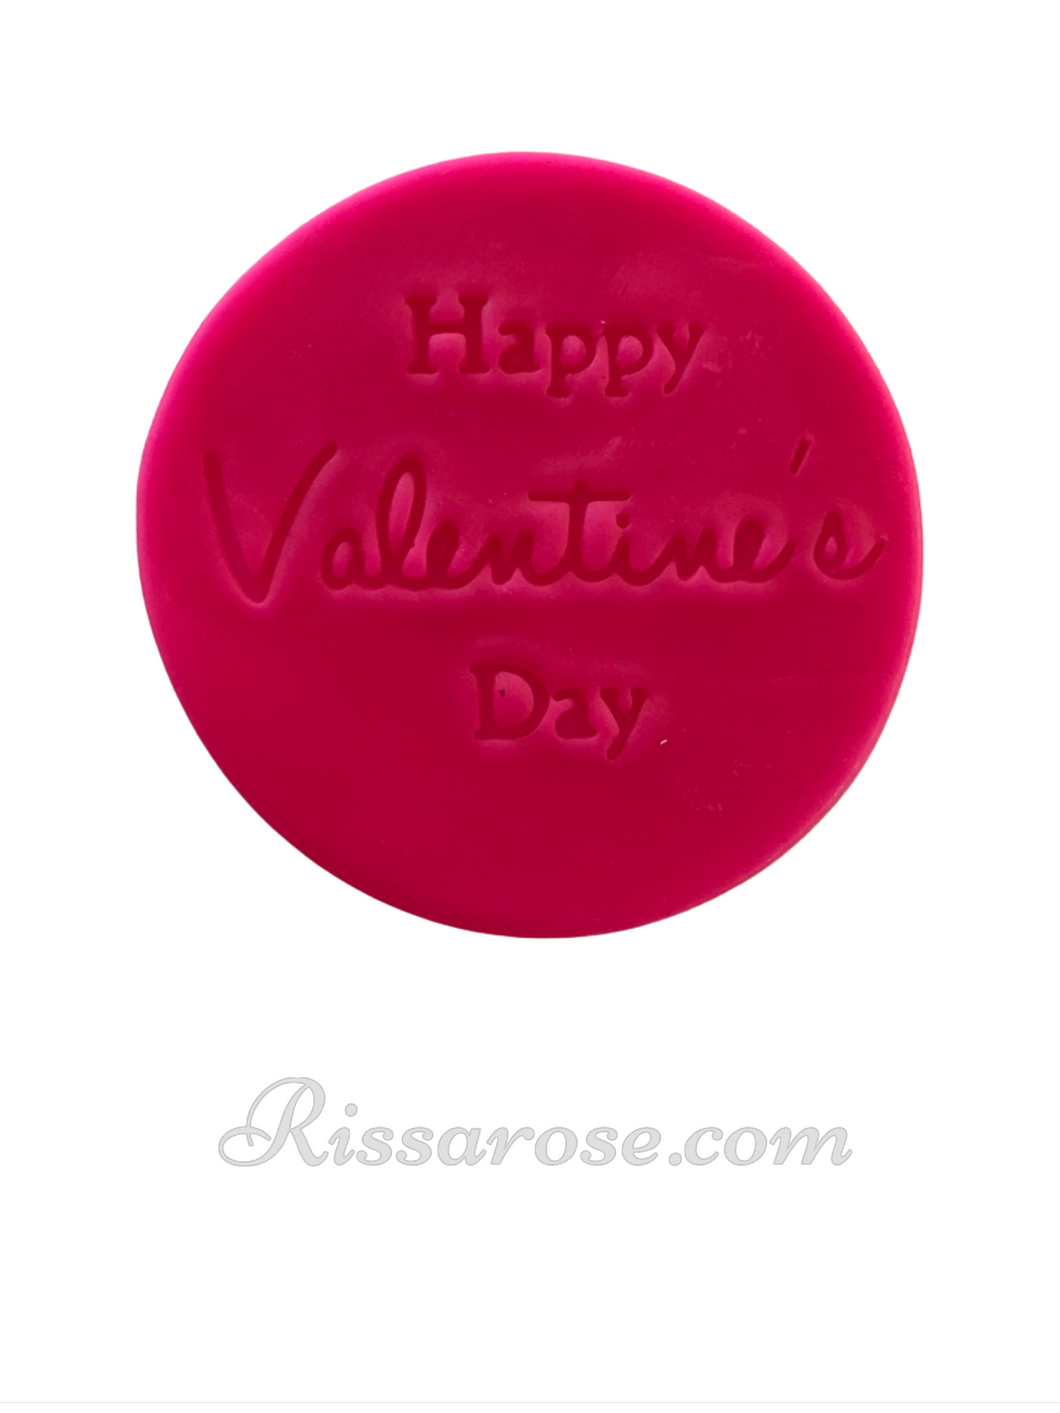 happy valentine's day cookie stamps rose floral heart fondant embosser happy v day